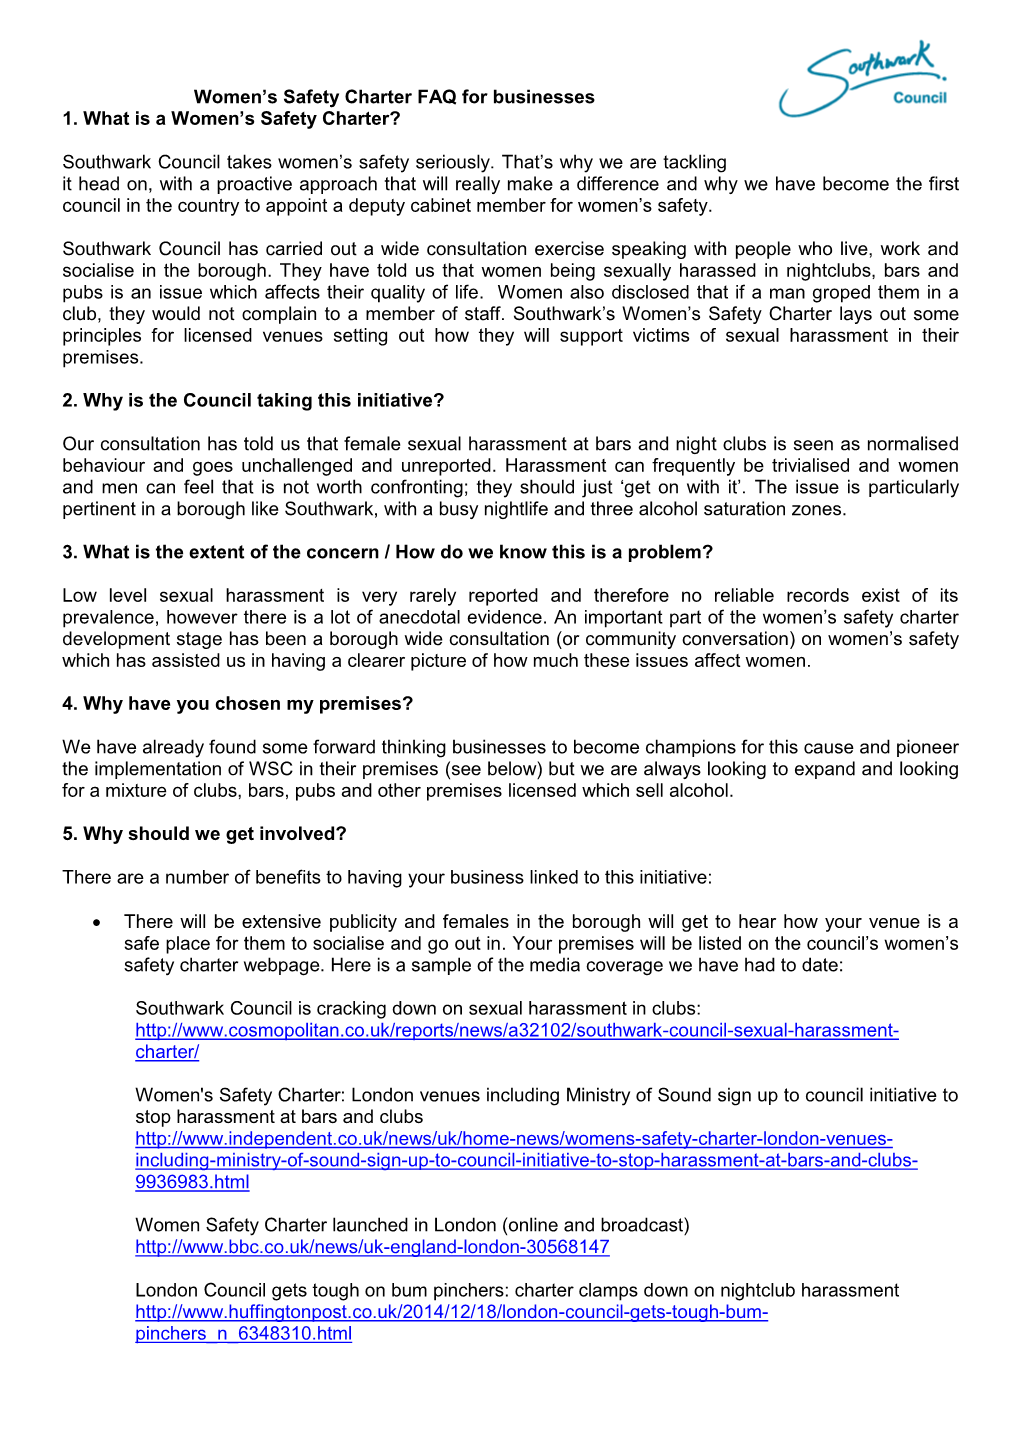 Women's Safety Charter FAQ for Businesses